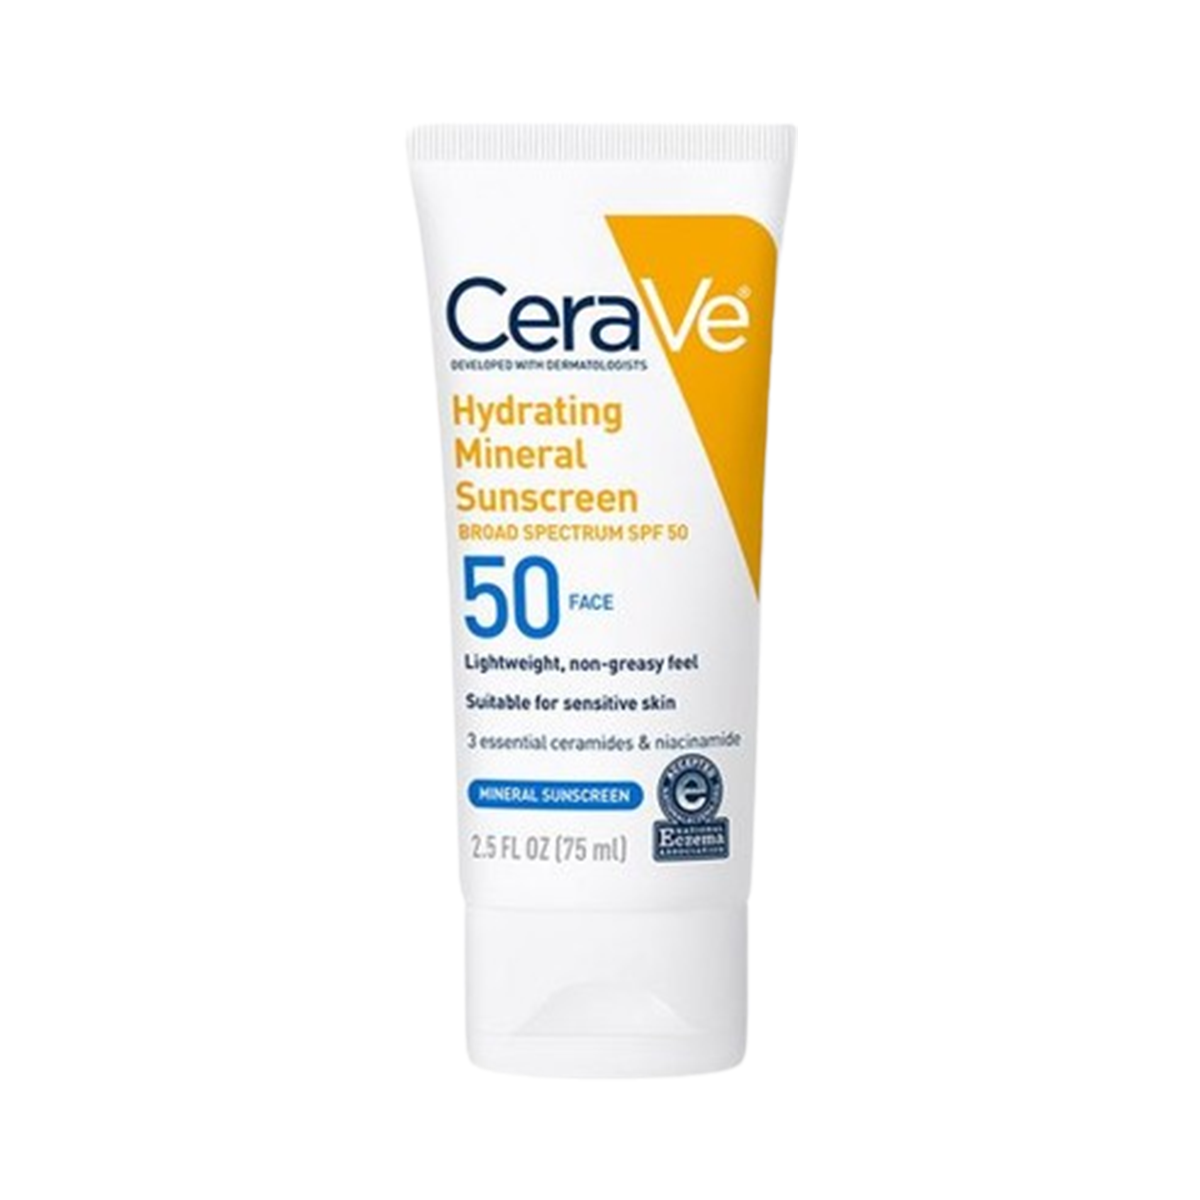 First product image of CeraVe Hydrating Mineral Sunscreen SPF50 75ml